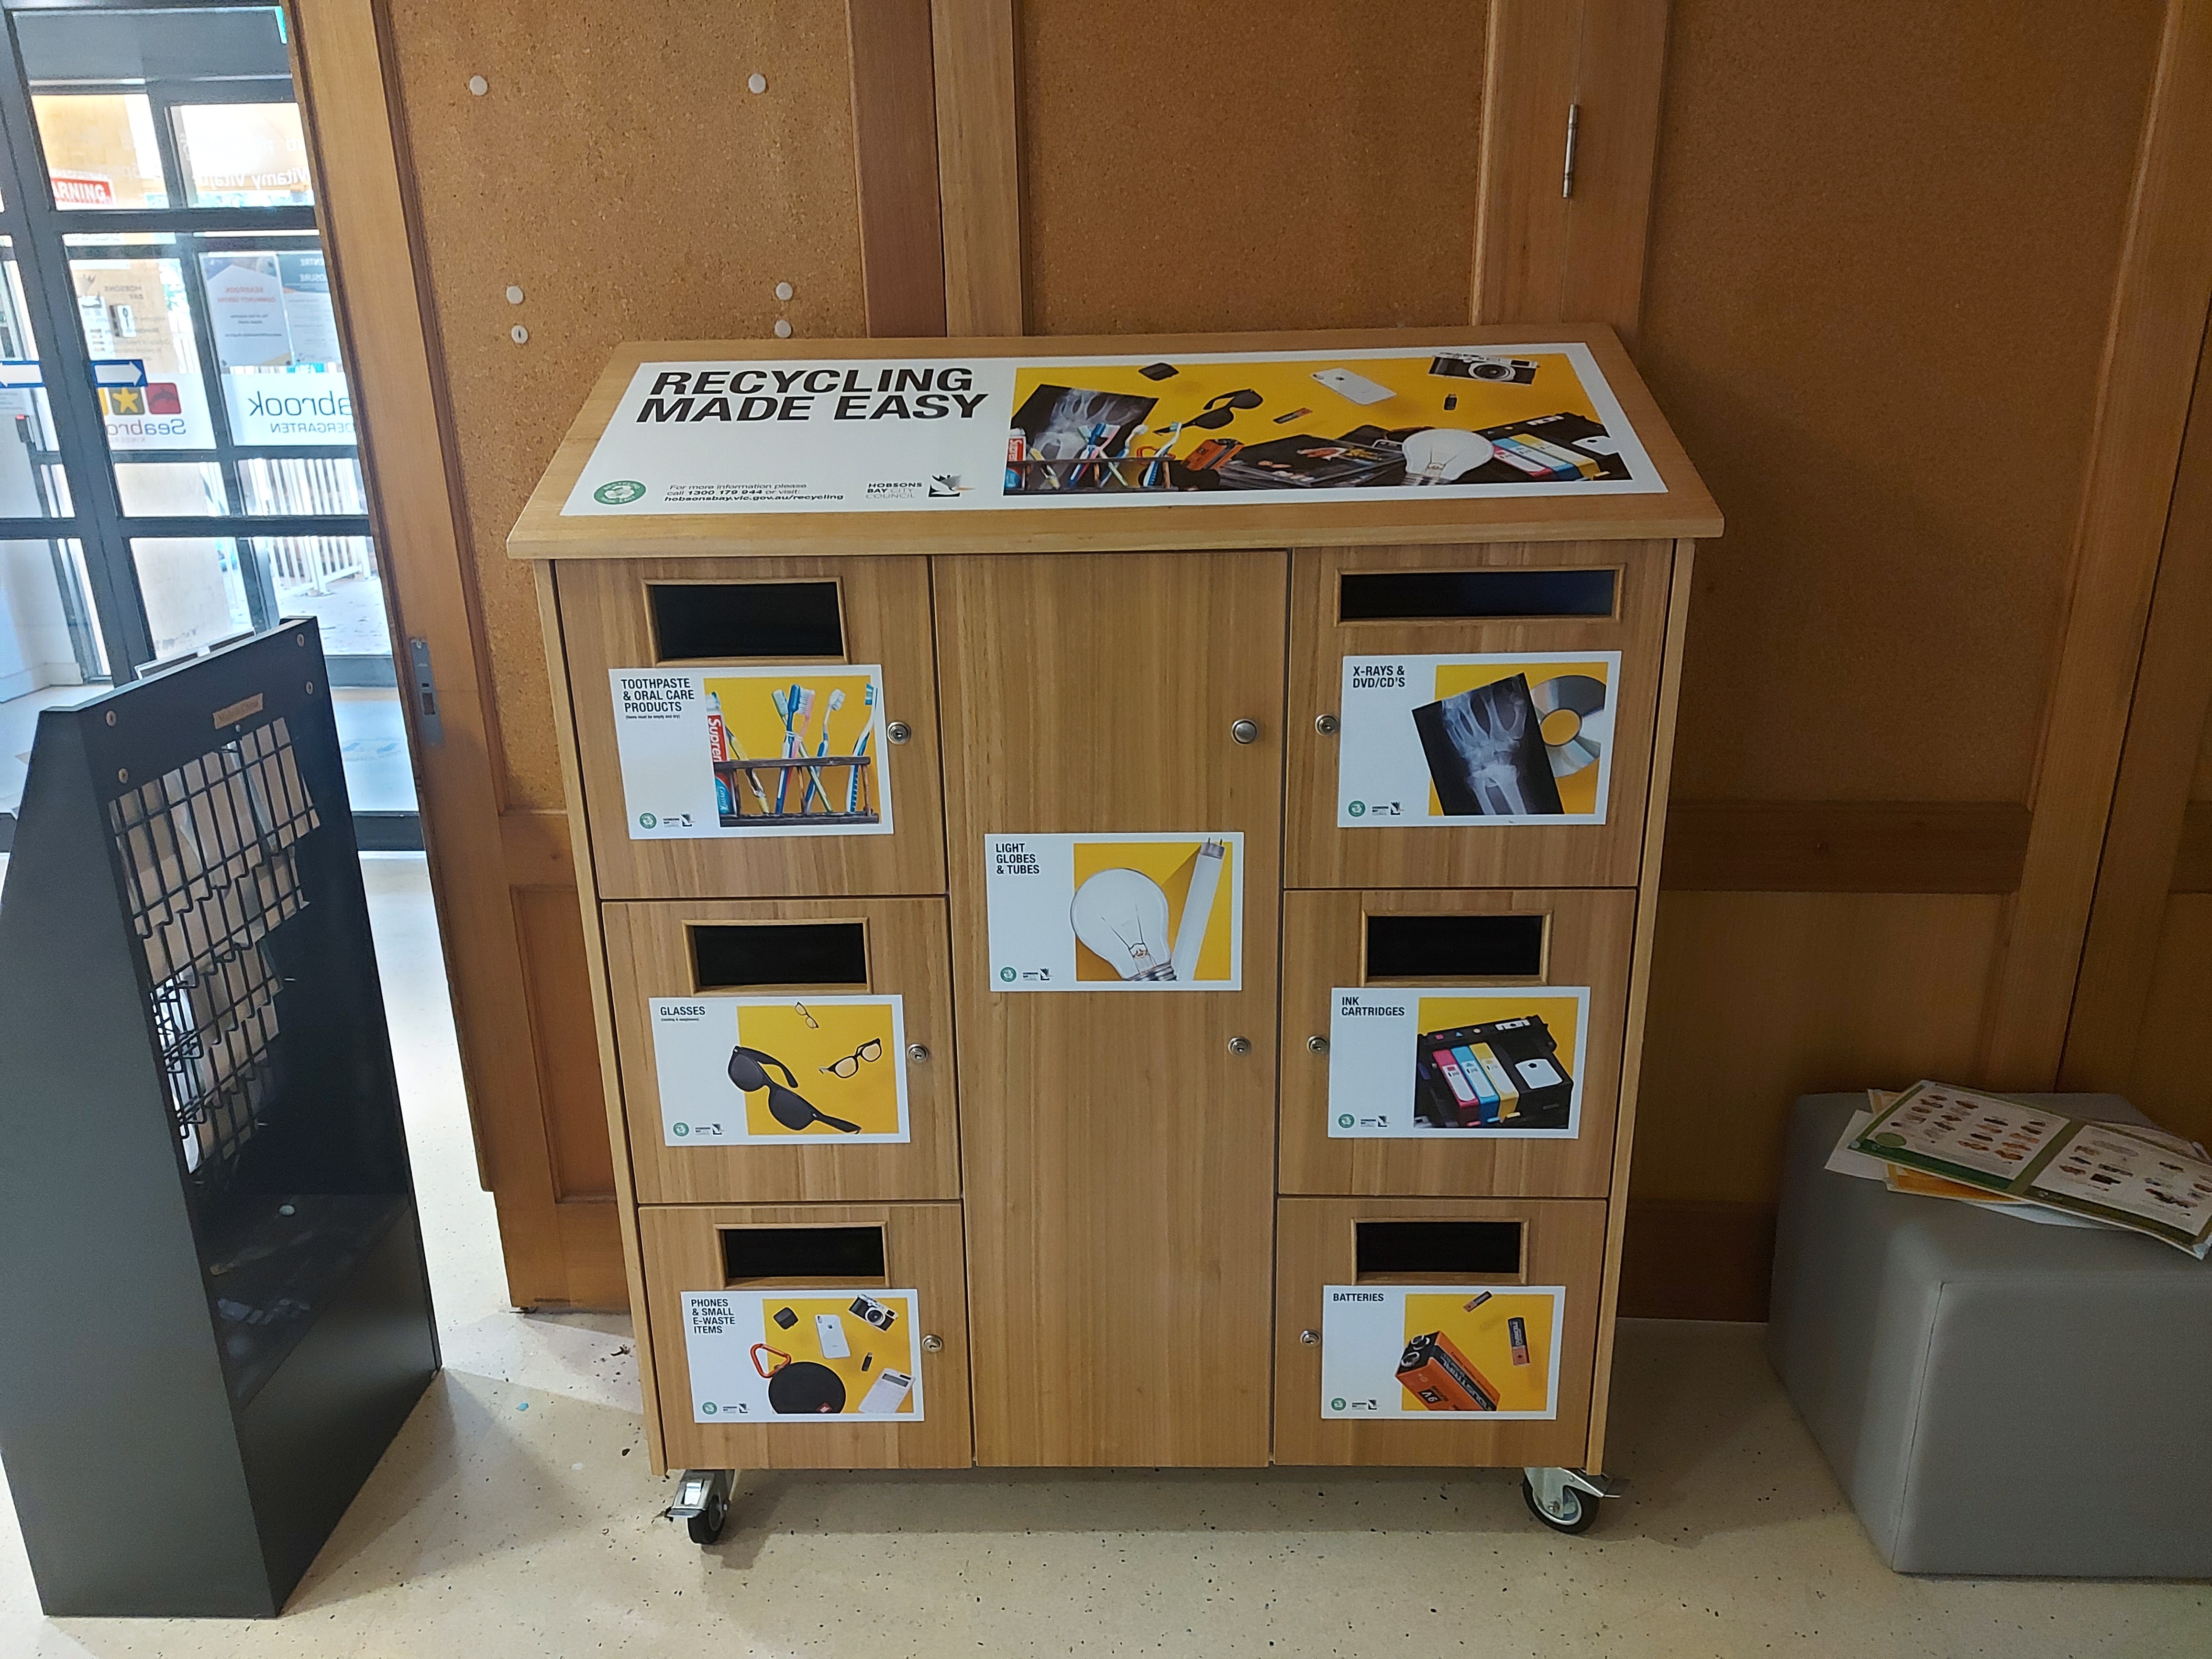 Recycling Made Easy hub stationed at local community centre. Cabinet with sections for different items such as sunglasses, light globes and batteries. 